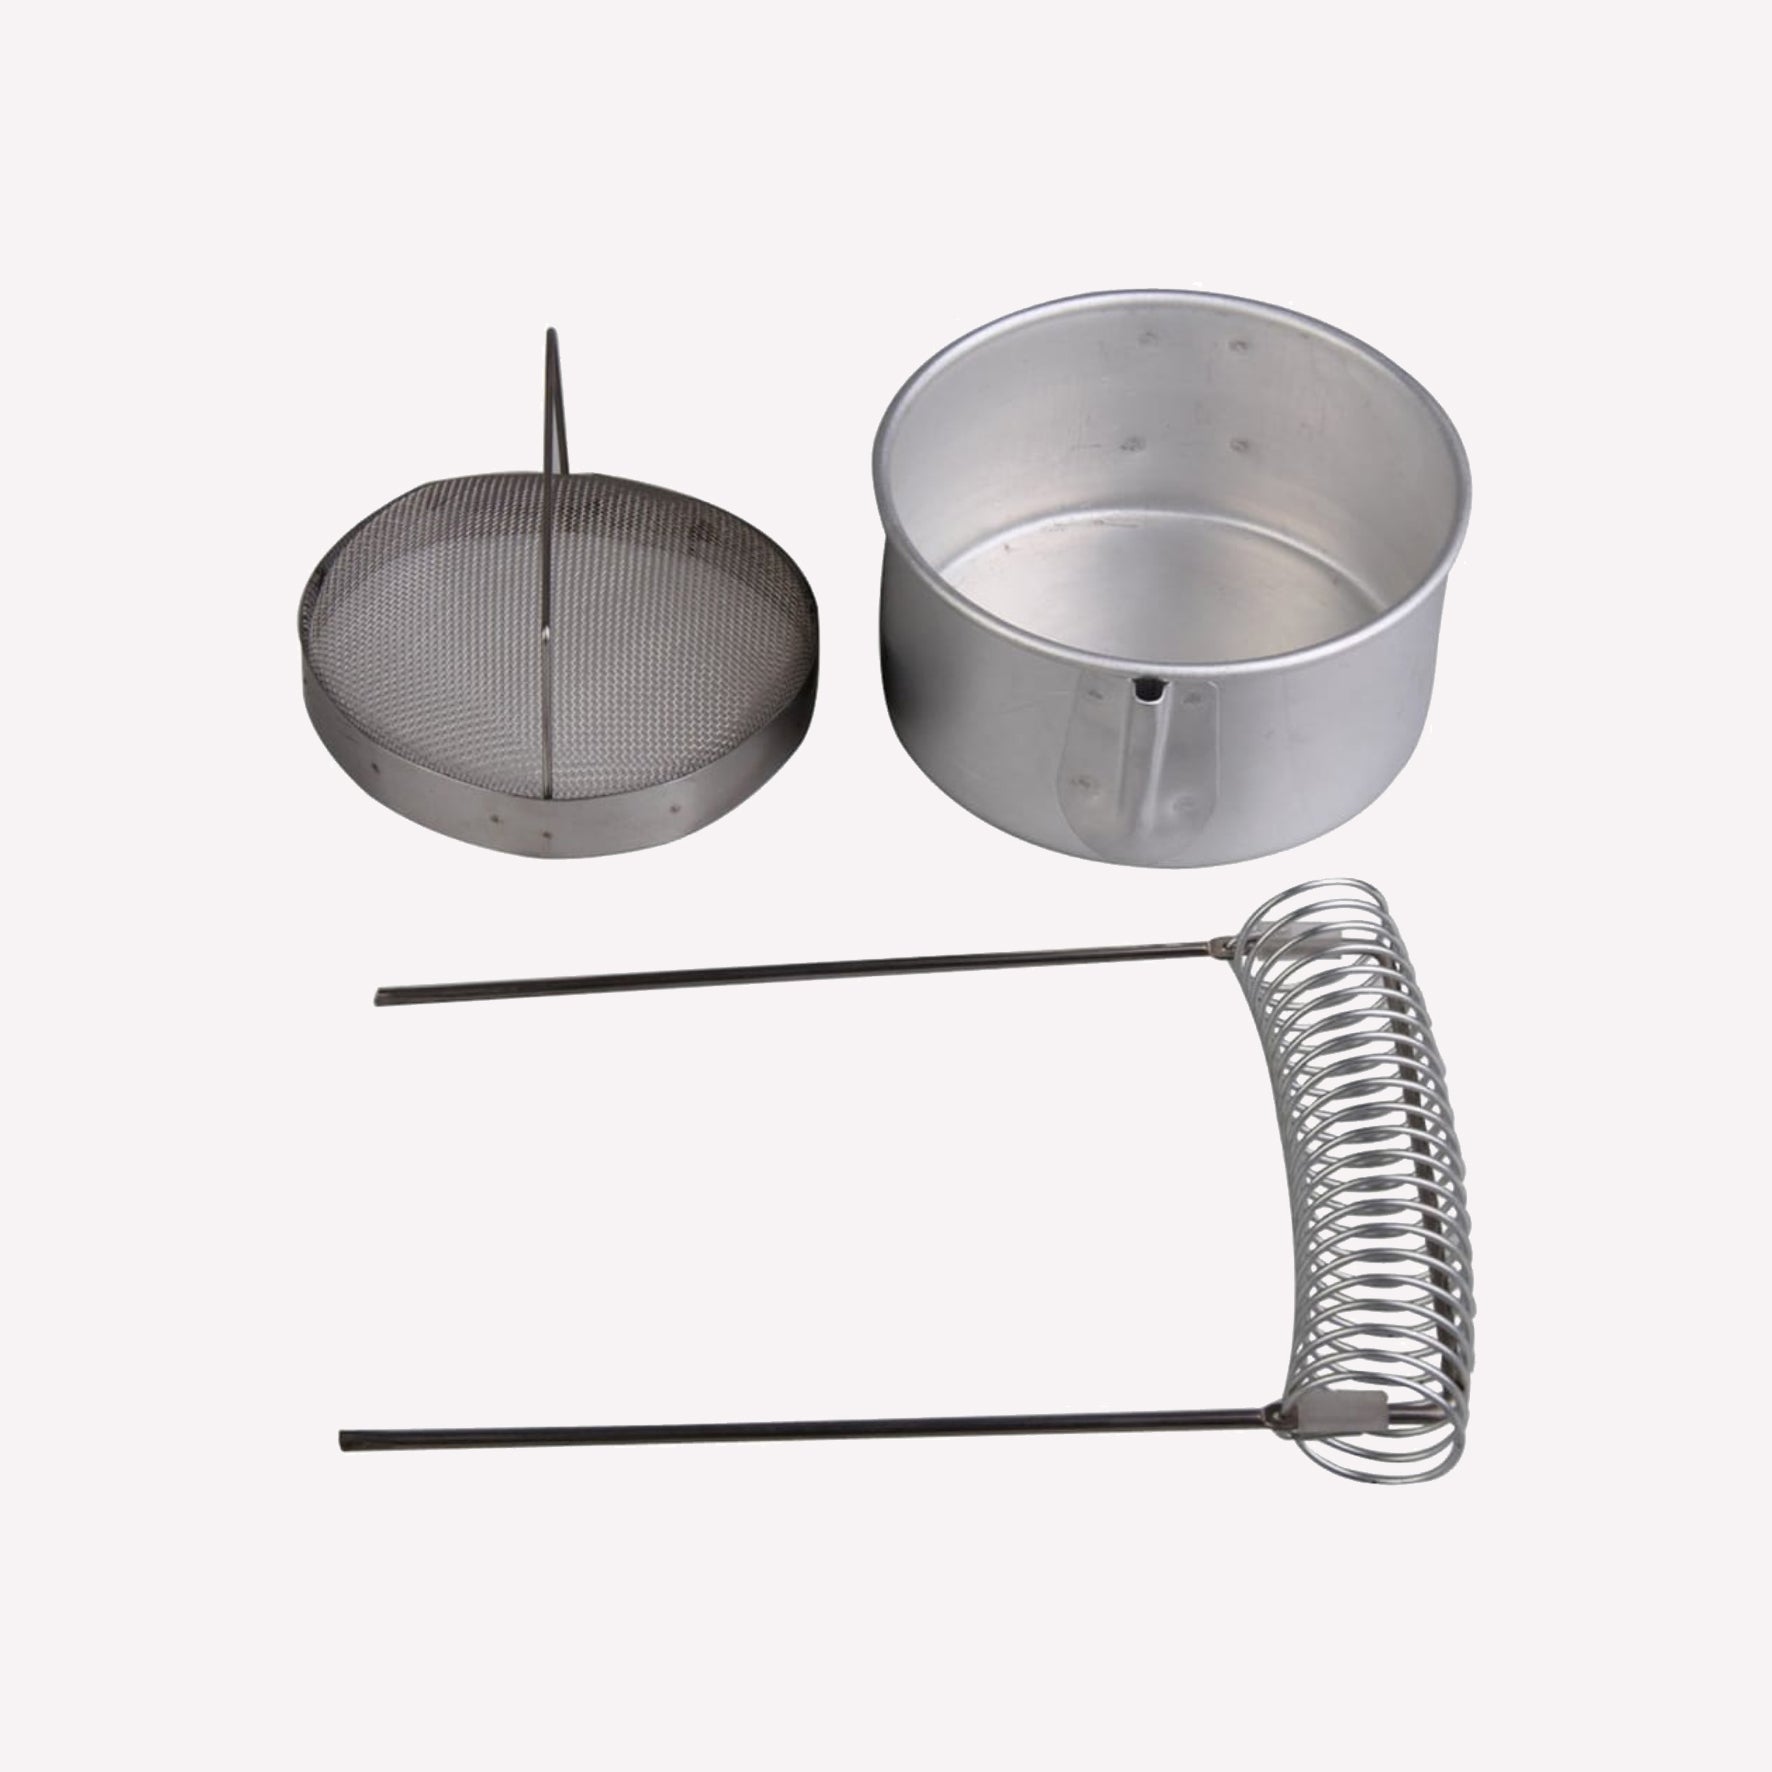 Components of a metal brush washer with a pot to hold cleaning solvent, a mesh strainer to catch paint sediment and keep solvent clean, and a spring  the pot to hold paintbrushes suspended in the solvent to prevent damage. Pot measures 10cm in diameter and 5cm deep, made from an easy to clean aluminium.. 